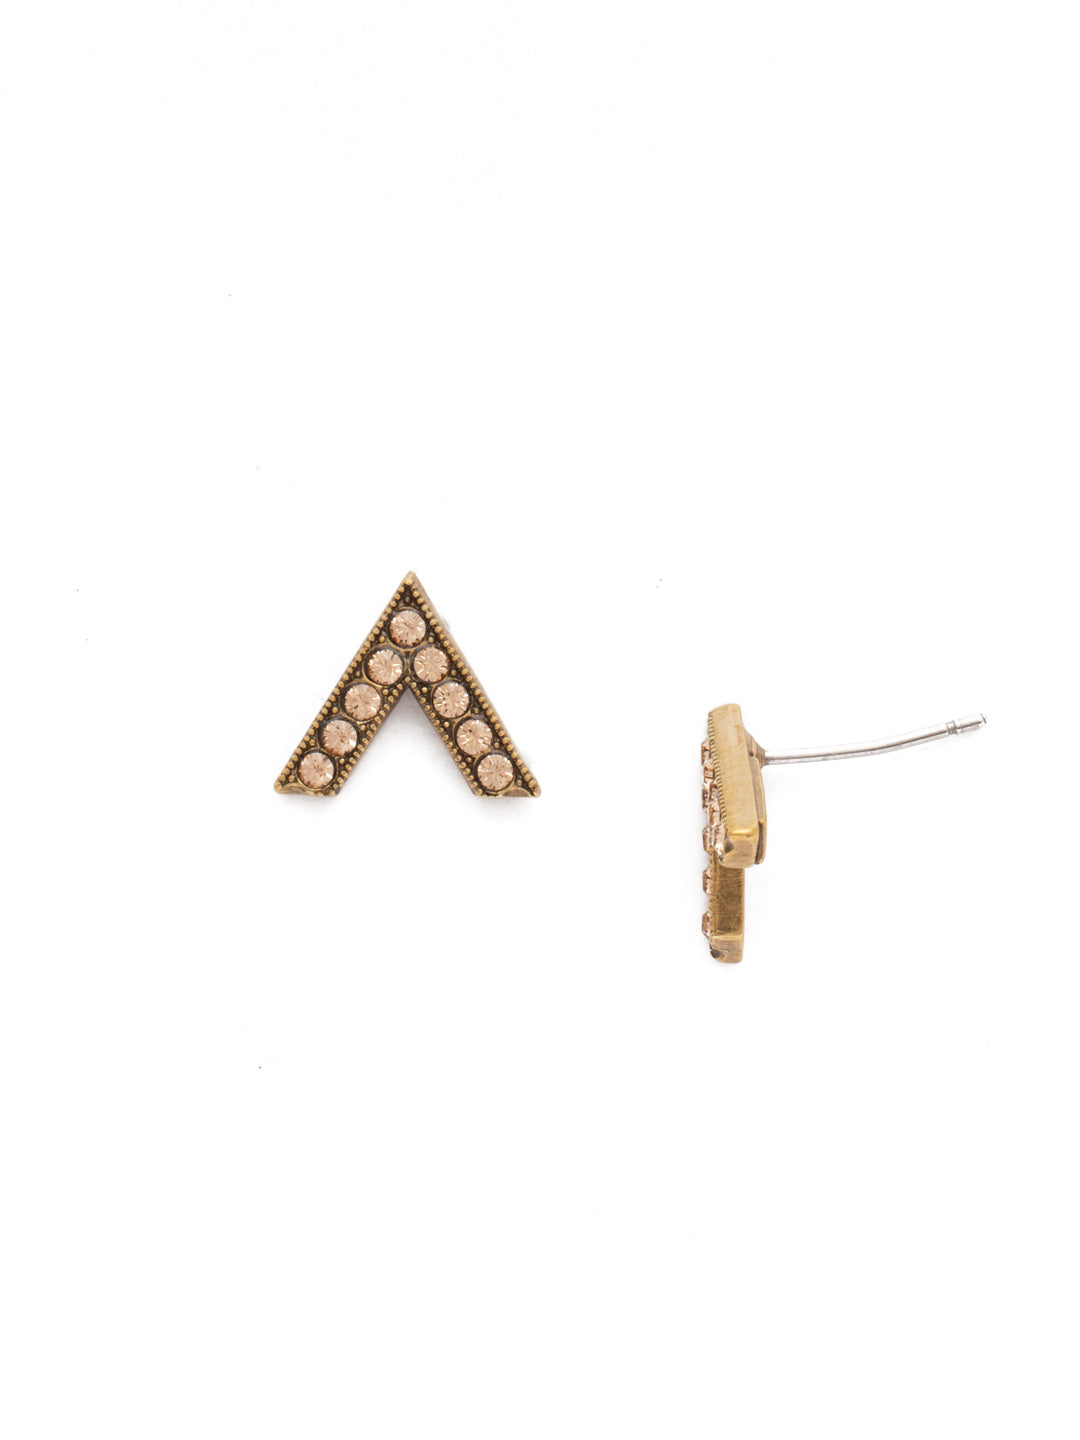 Fern Post Earrings - EEJ9AGLC - A classic Sorrelli style to make a statement or wear everyday. From Sorrelli's Light Colorado collection in our Antique Gold-tone finish.